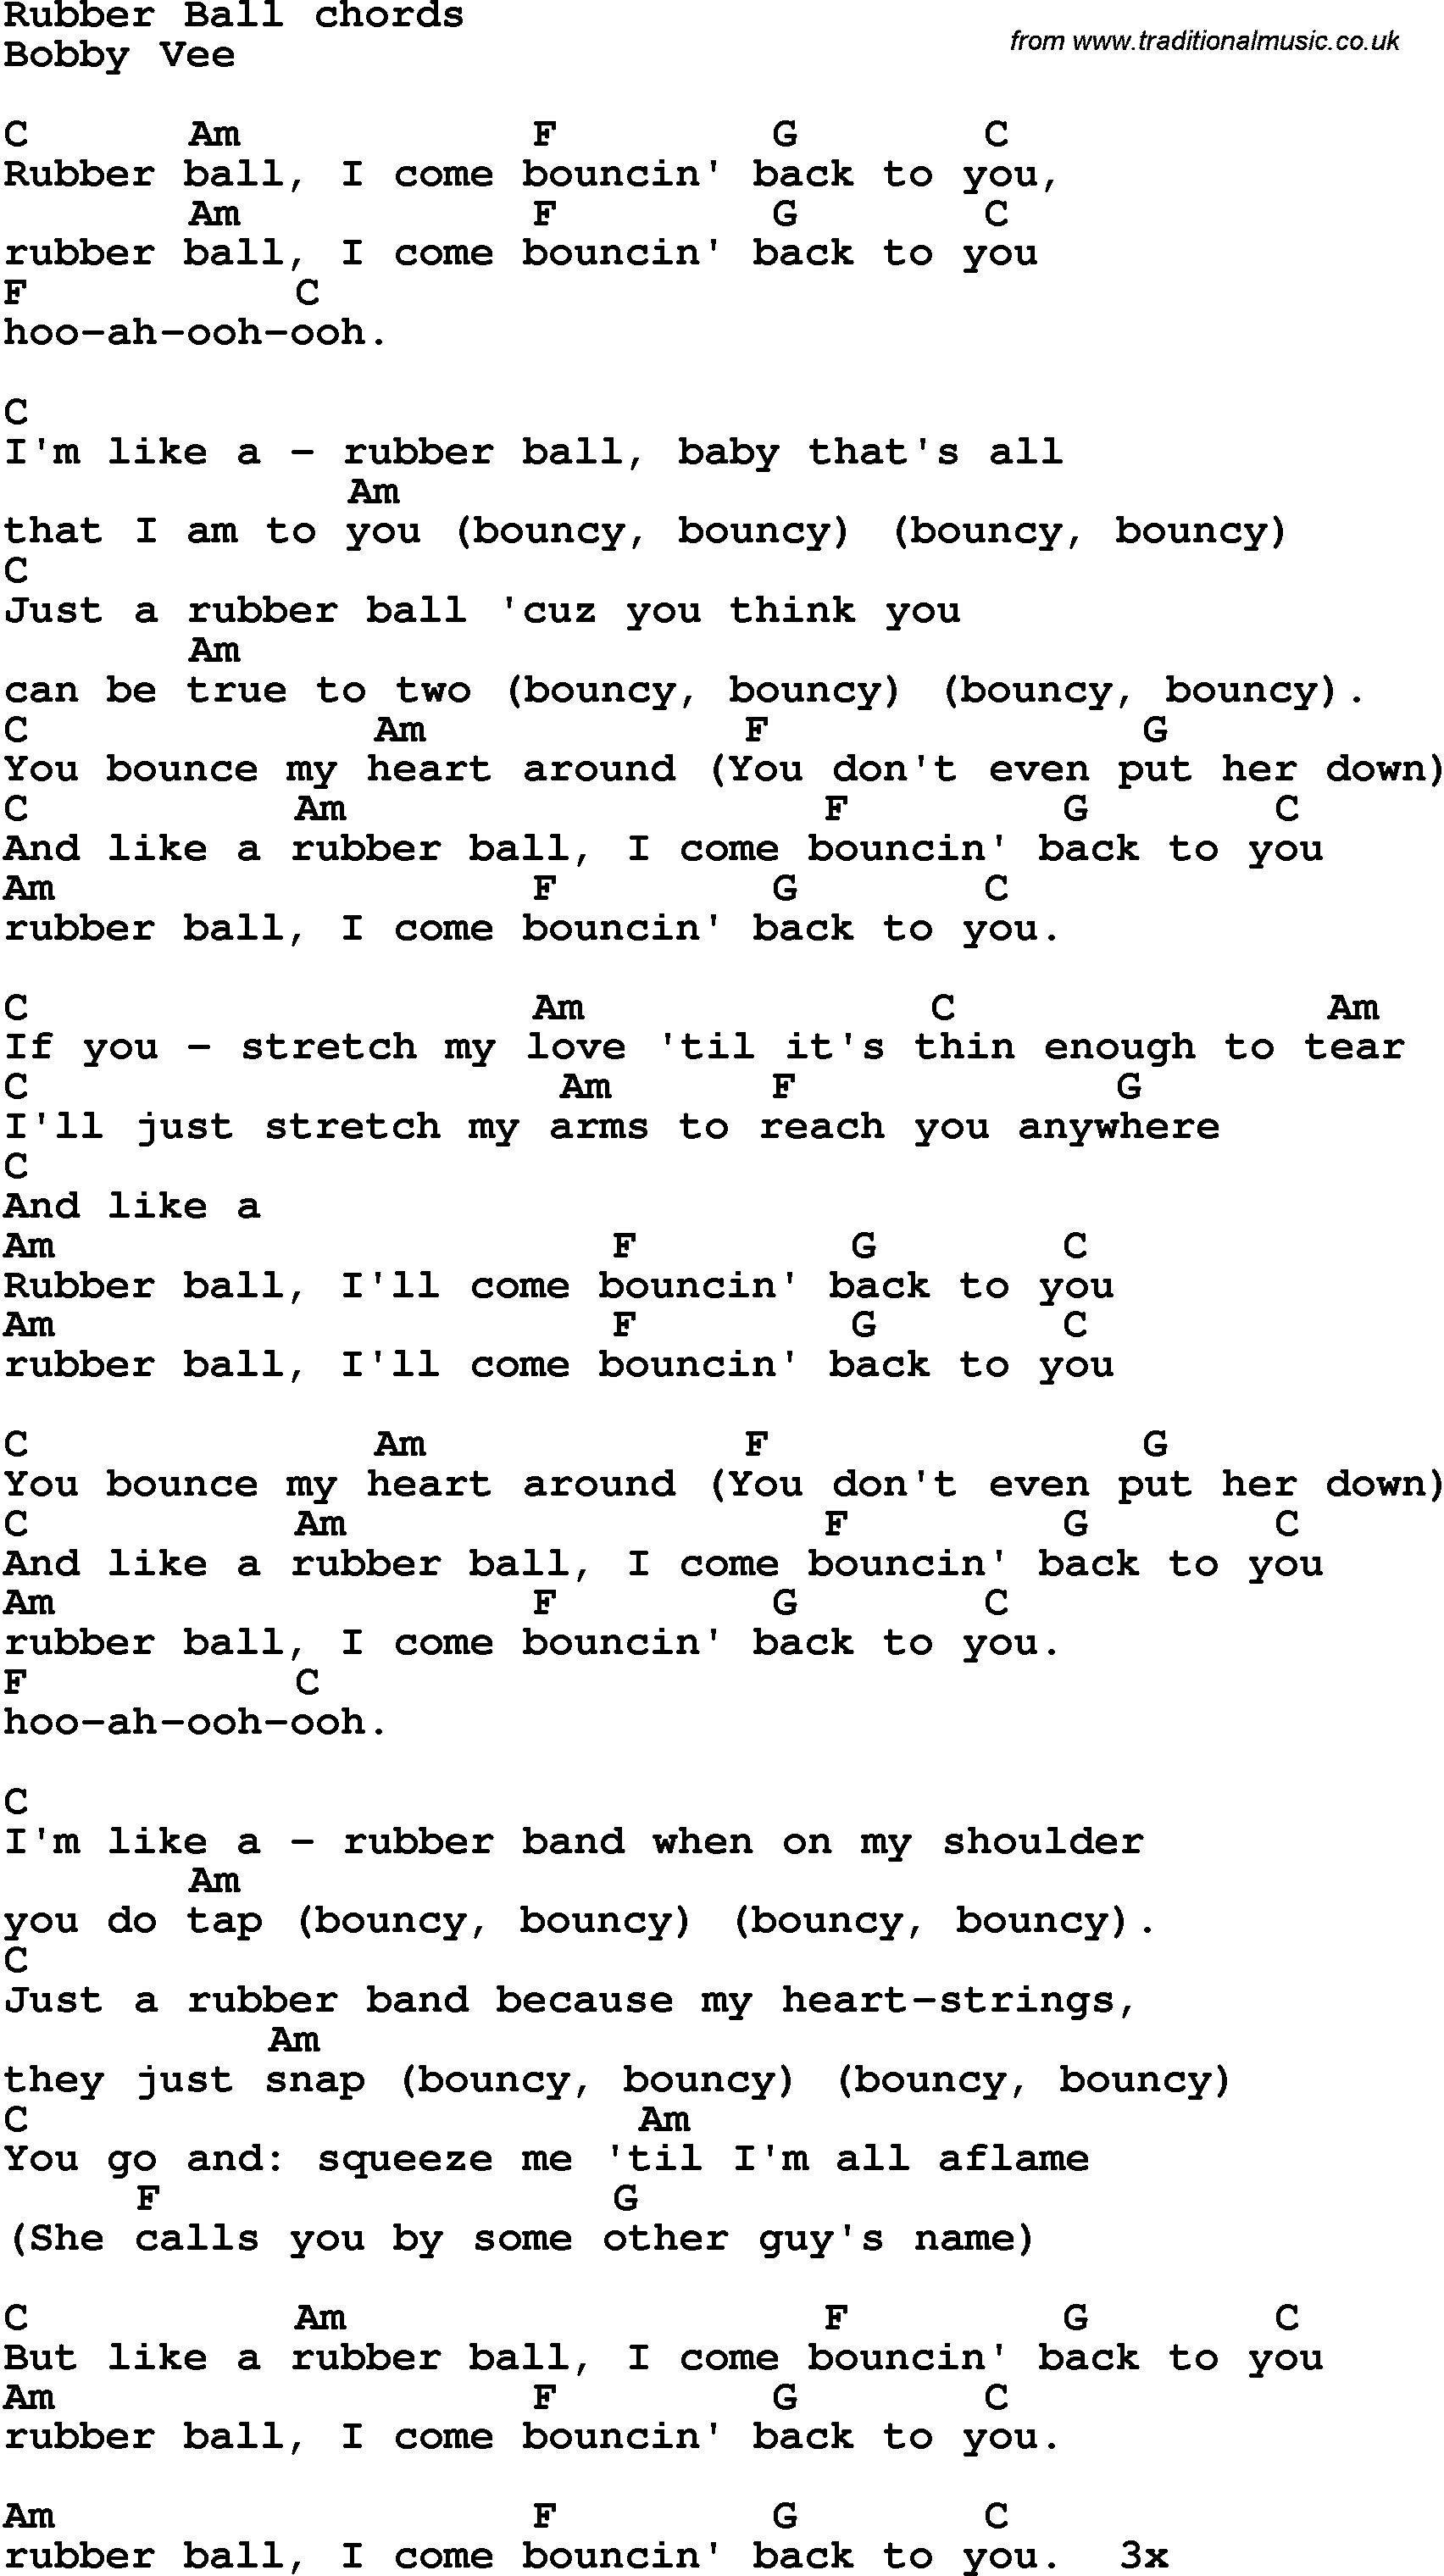 Song Lyrics with guitar chords for Rubber Ball